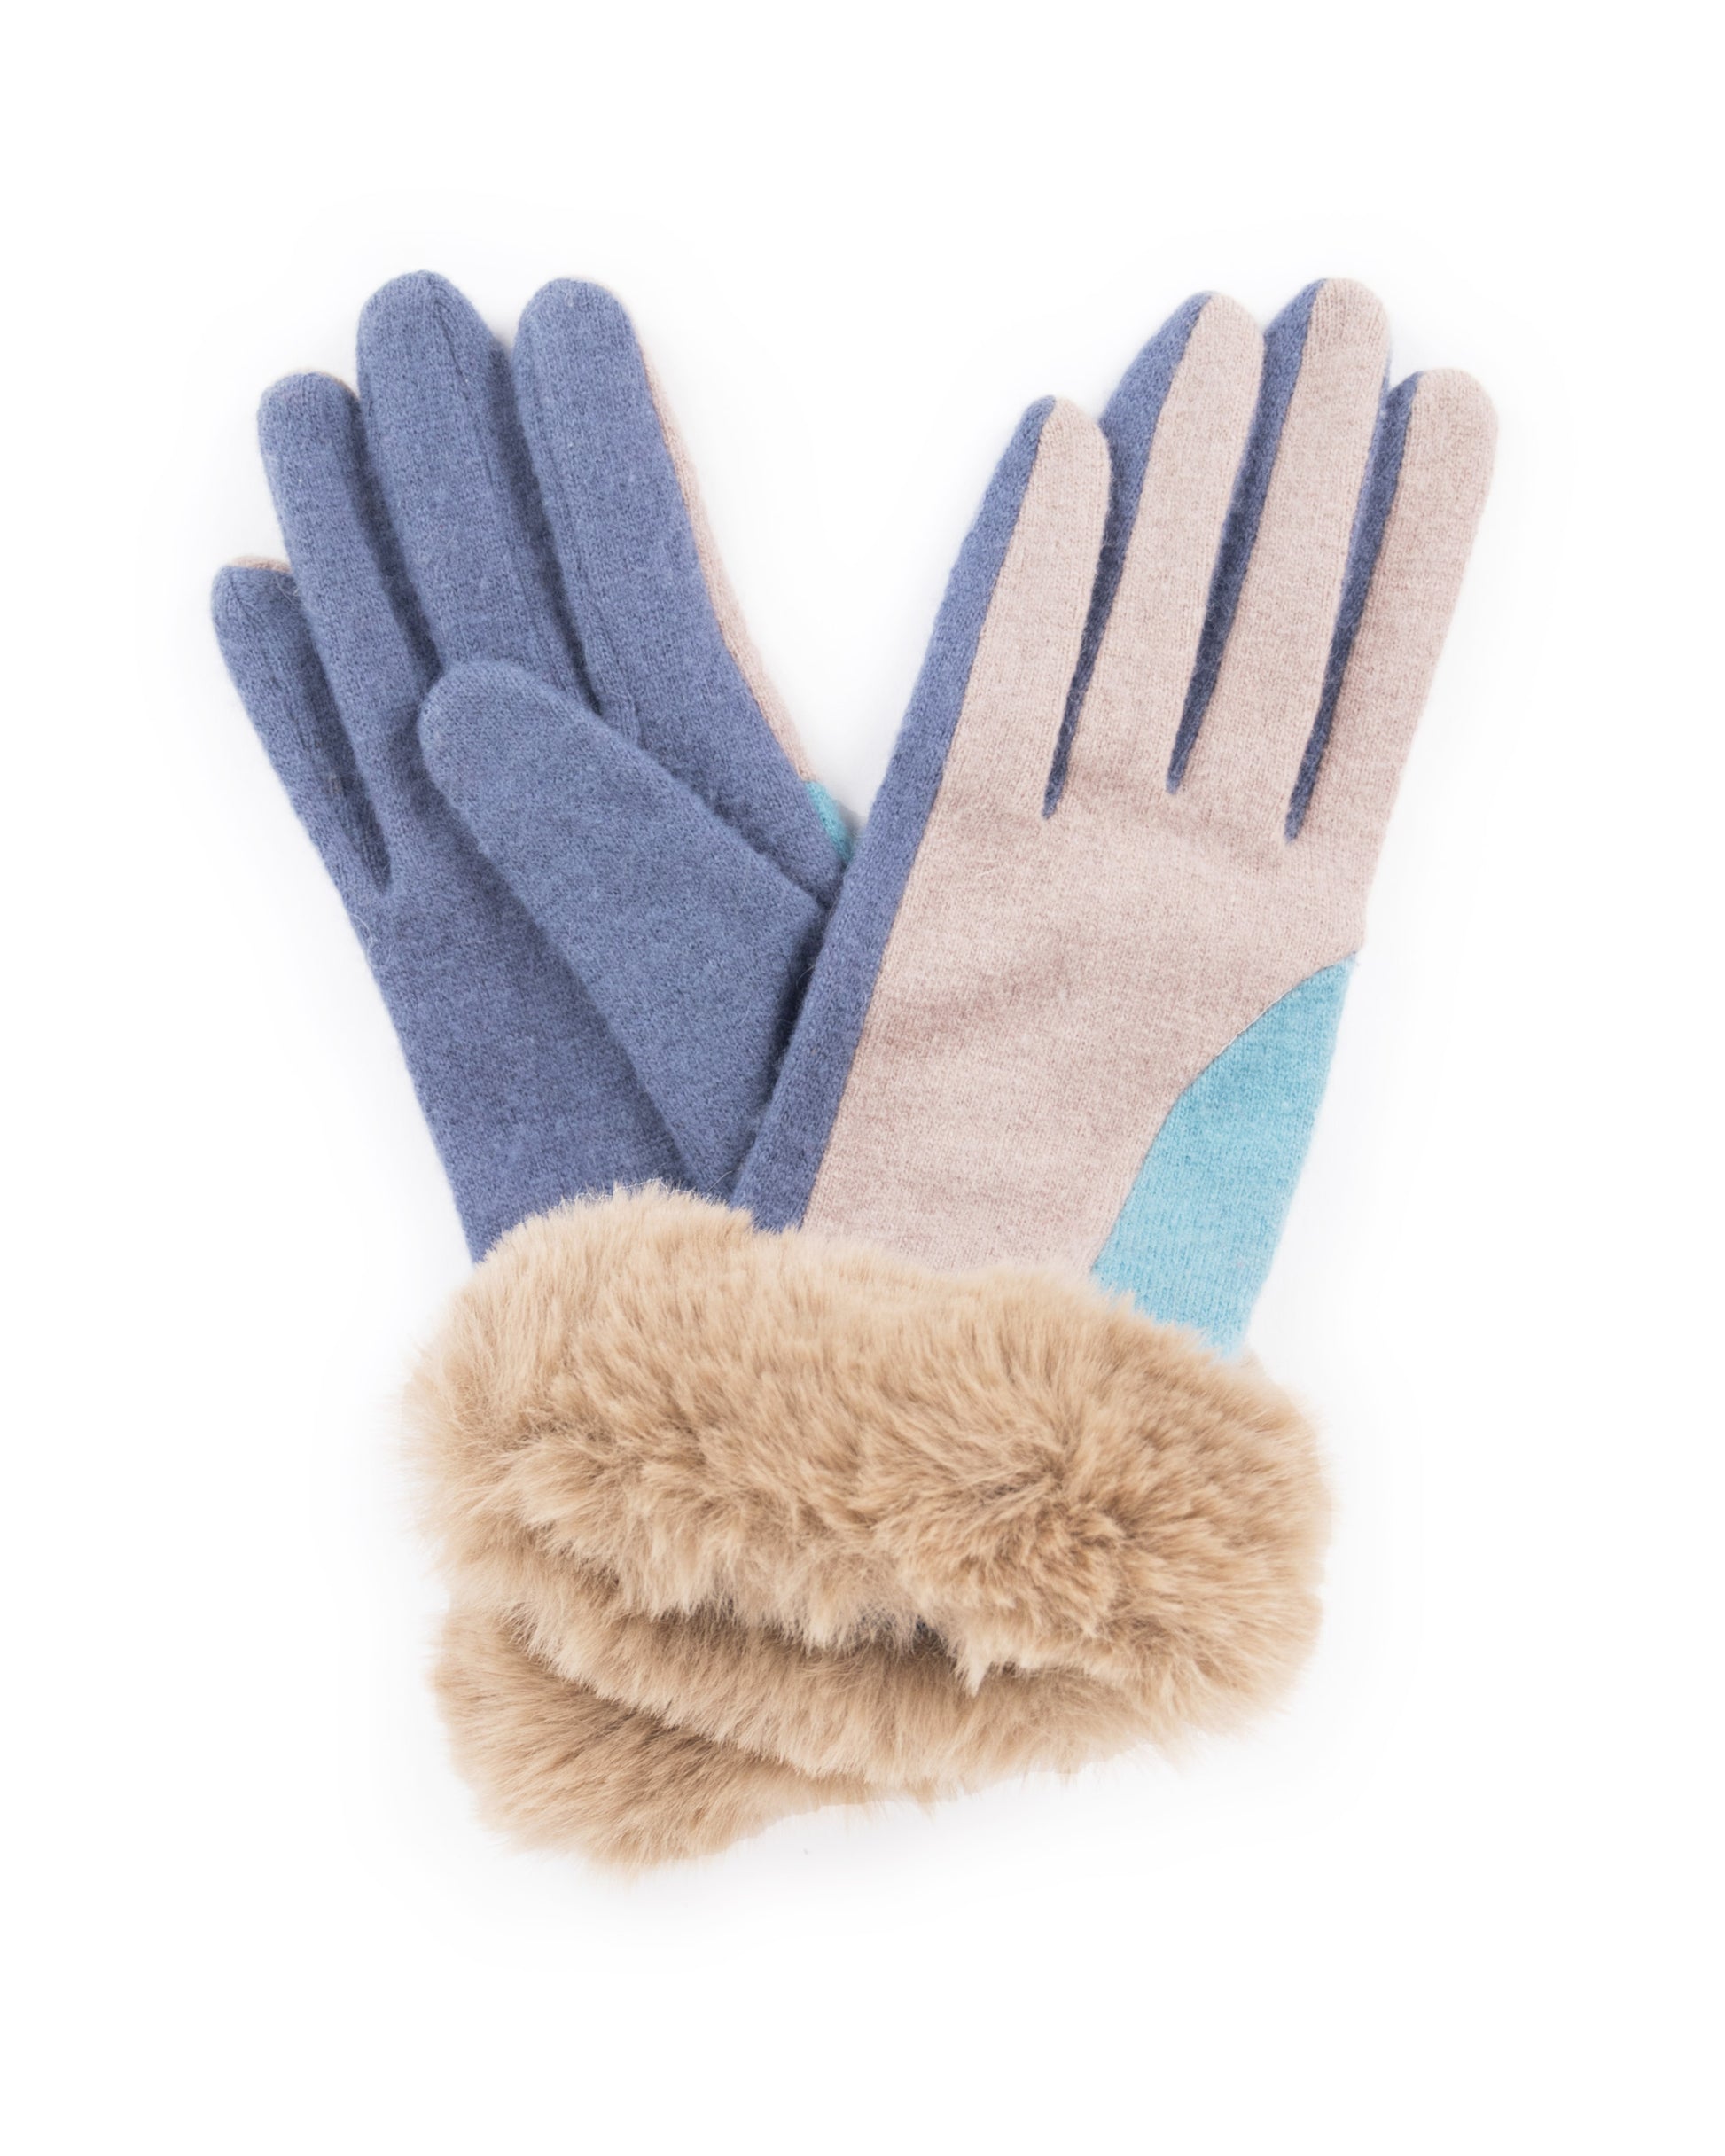 Women's Wool Gloves - Best Wool Gloves for Winter | Eve&Flamingo | Eve and Flamingo